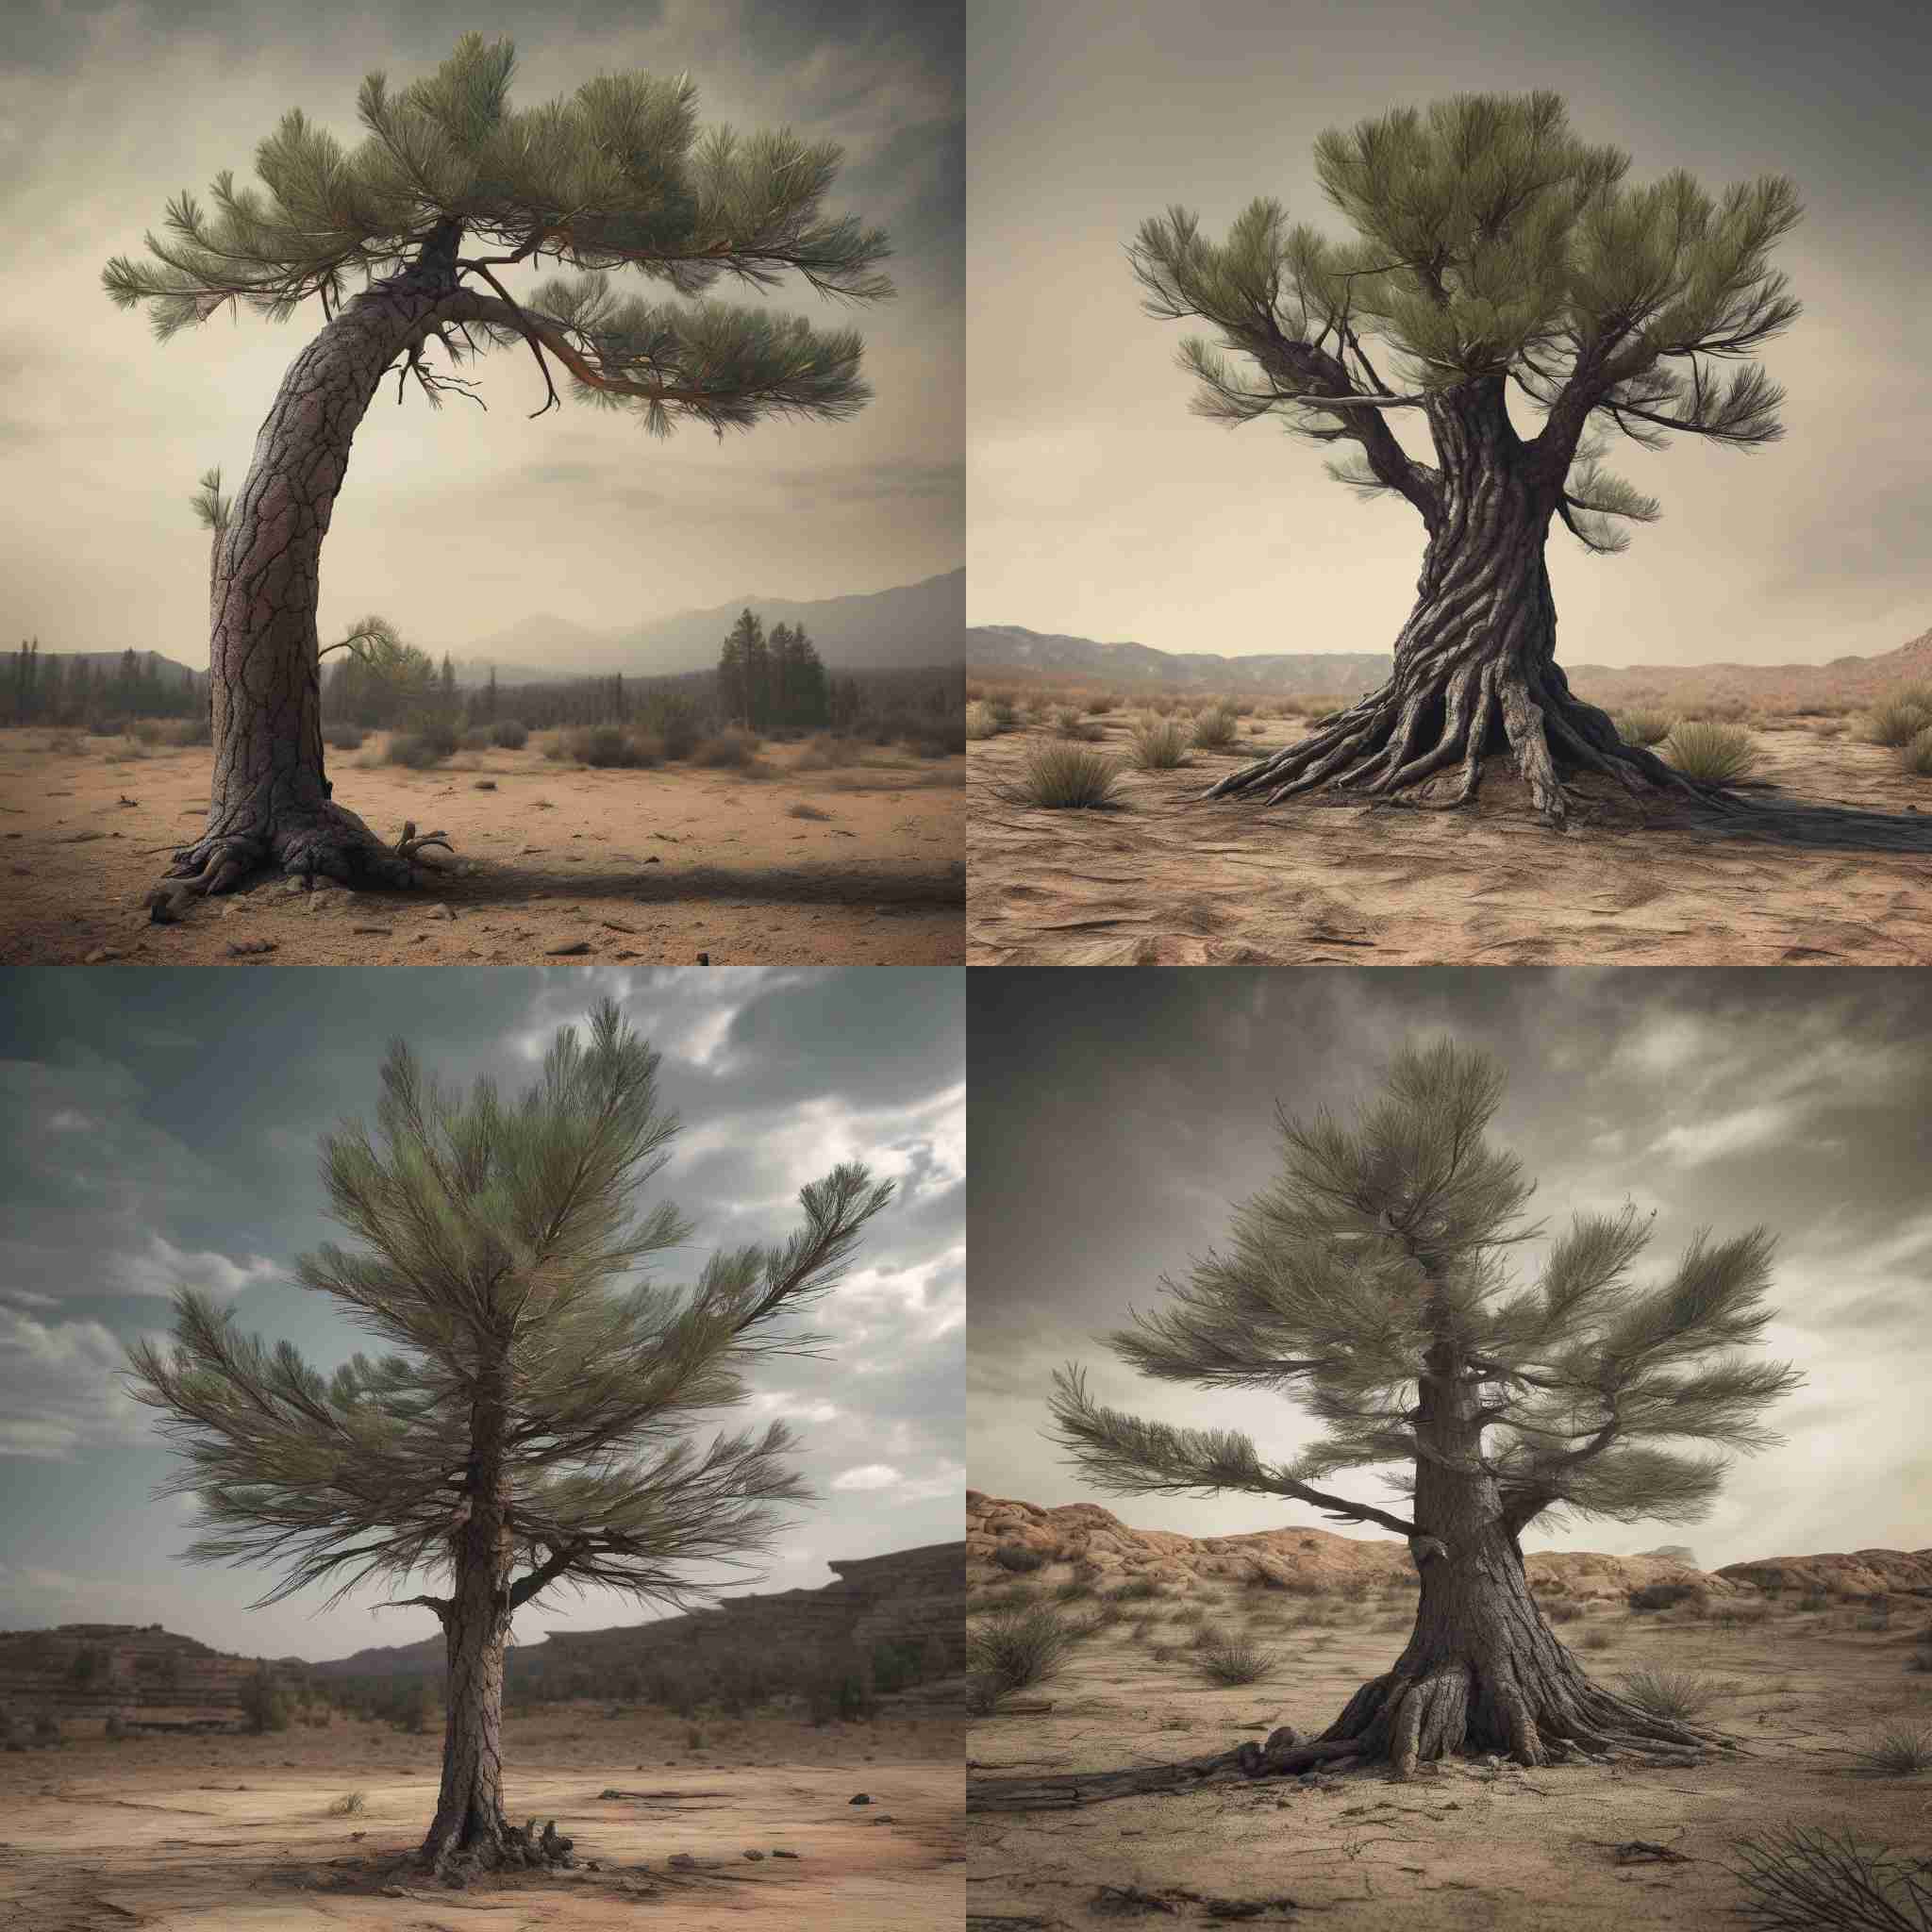 A pine tree in severe drought